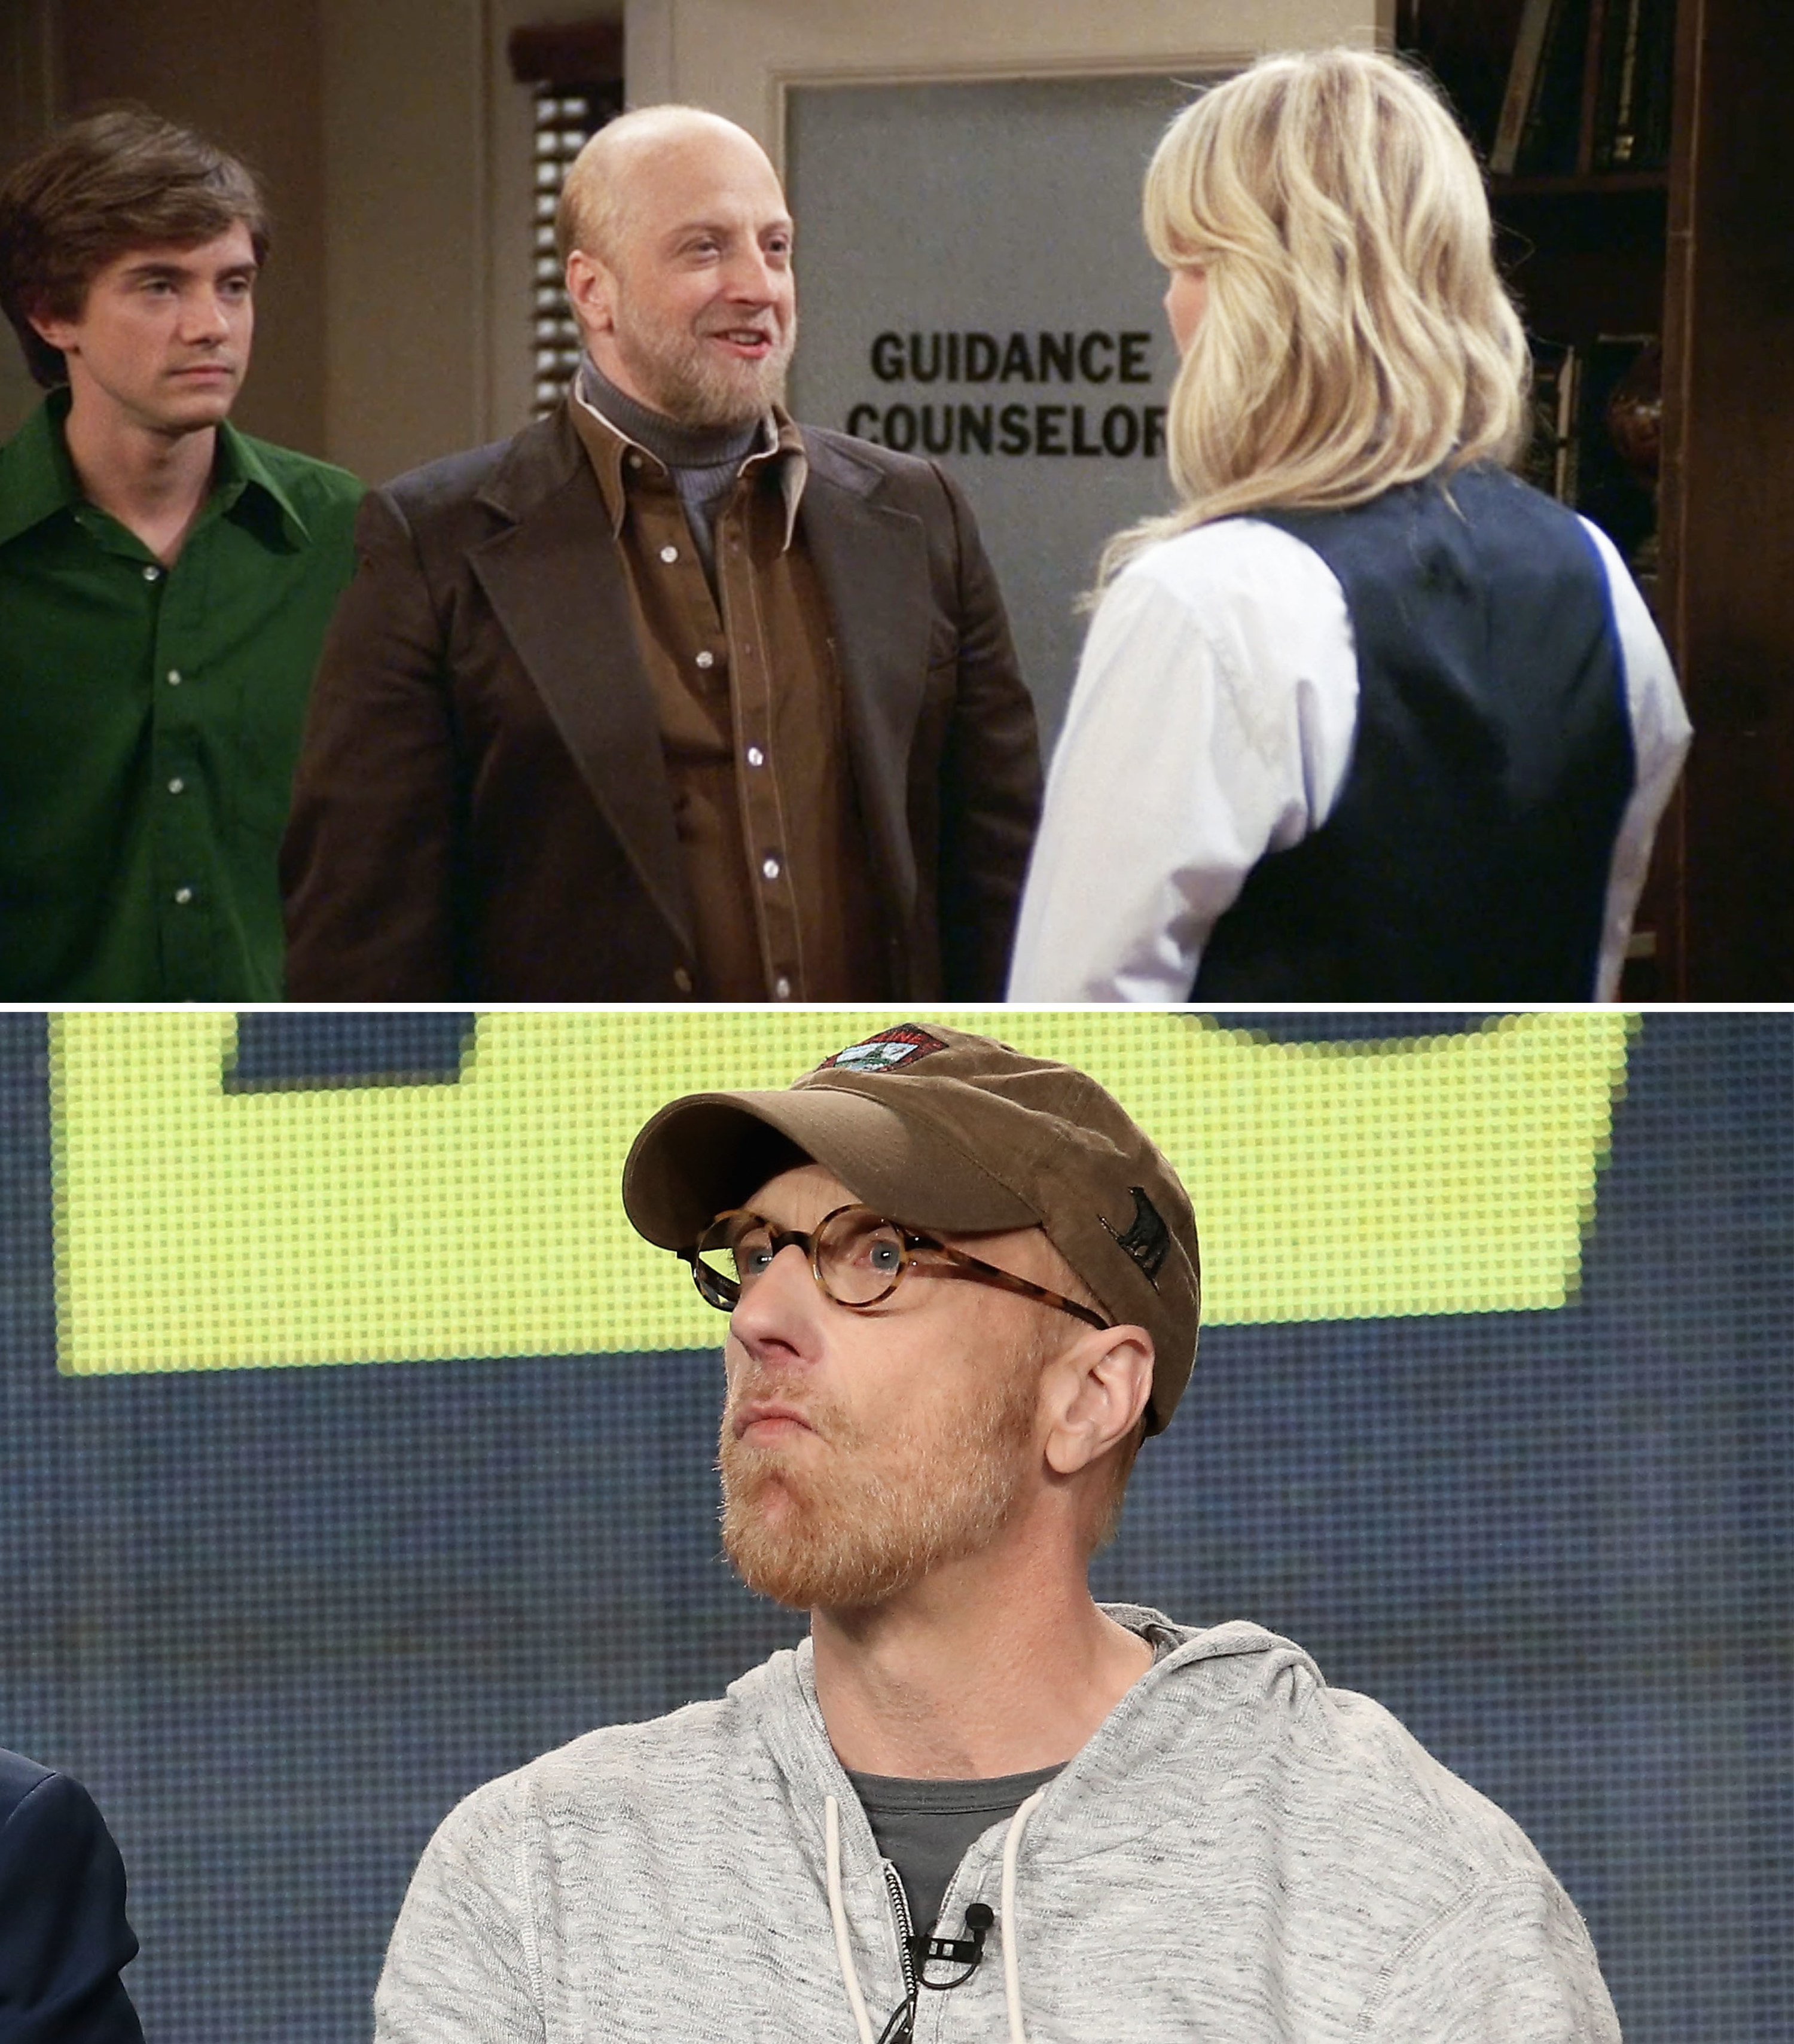 Chris as Mr. Bray and onstage in a cap and hoodie